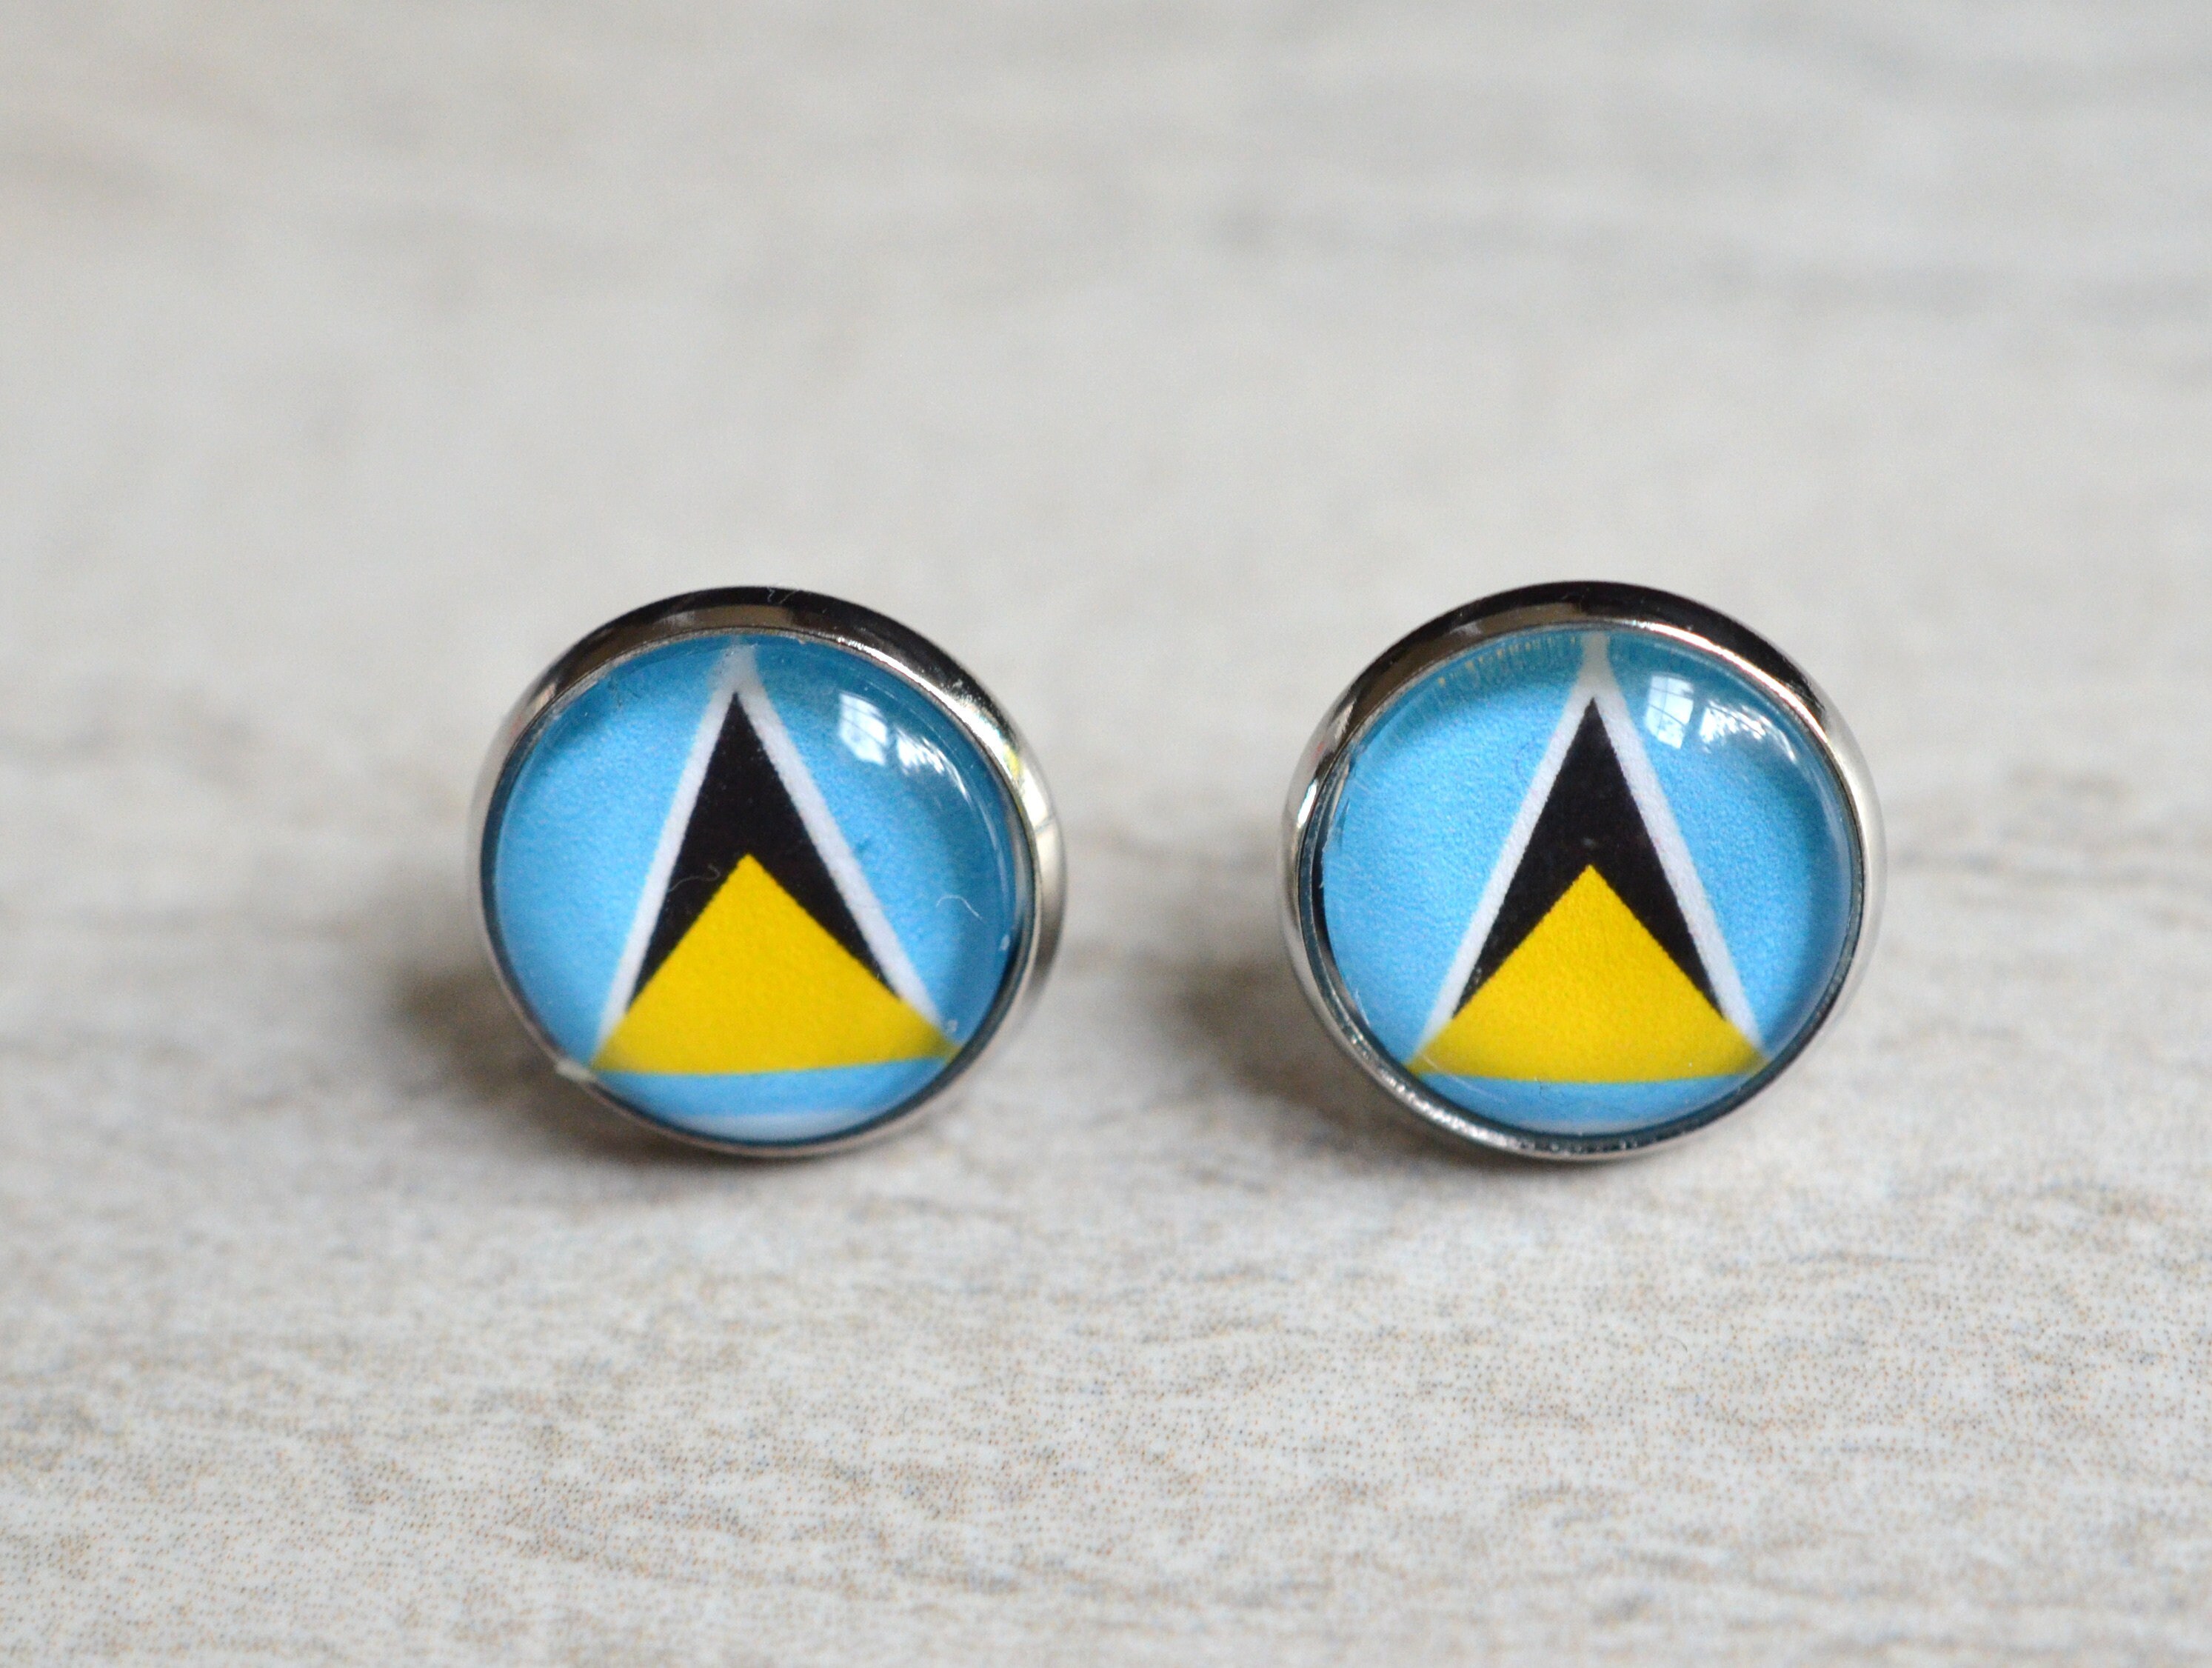 St Lucia flag necklace and earringSt Lucian flag design slippers earringSt Lucian carnival style jewelryBeaded necklaceSouvenirGift